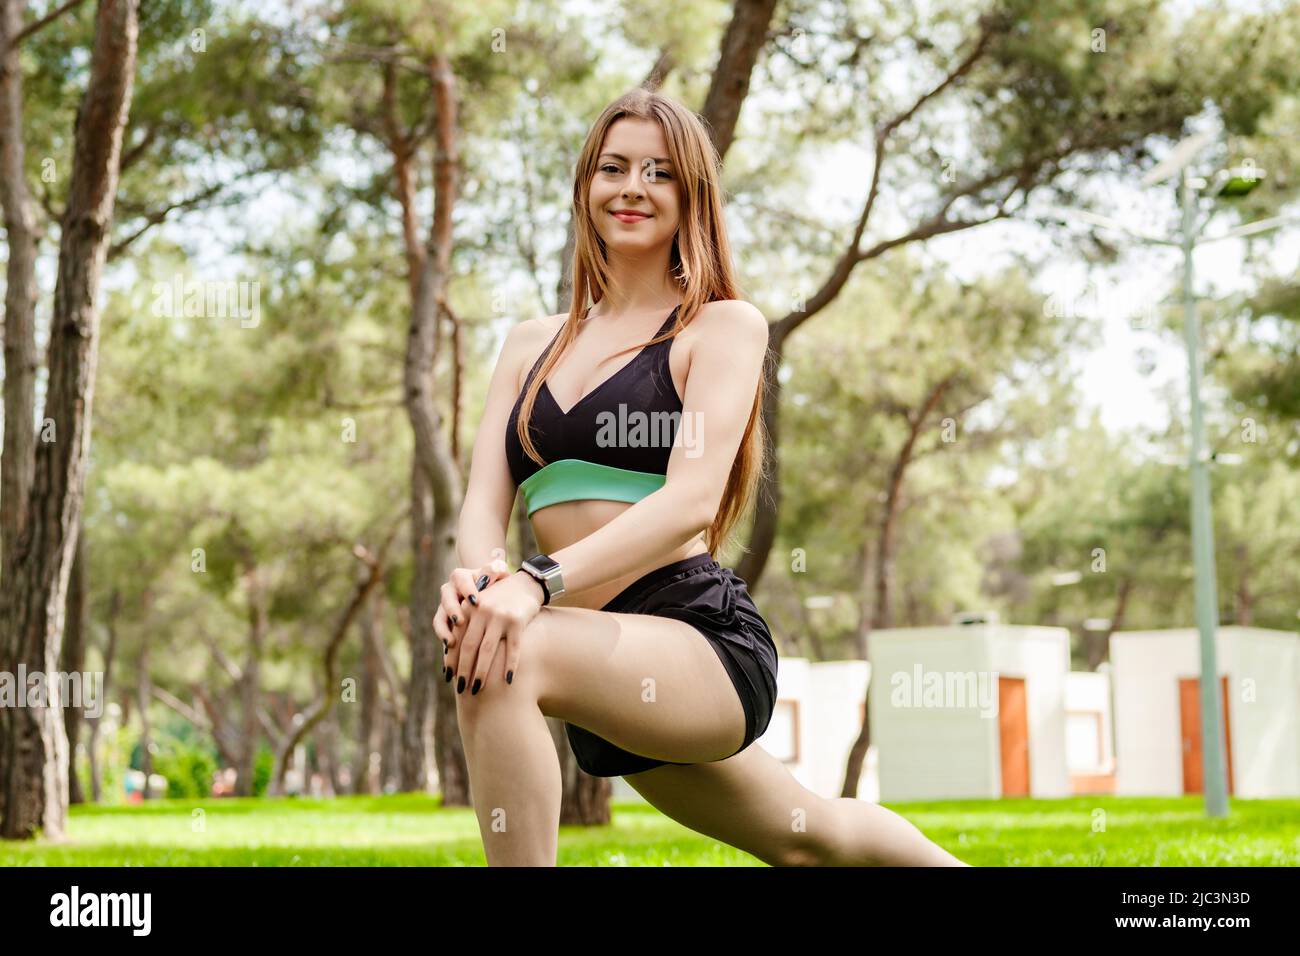 Happy sportive woman wearing sports bra standing on city park, outdoors doing stretching workout. Stretching and motivation, outdoor sport concepts. Stock Photo